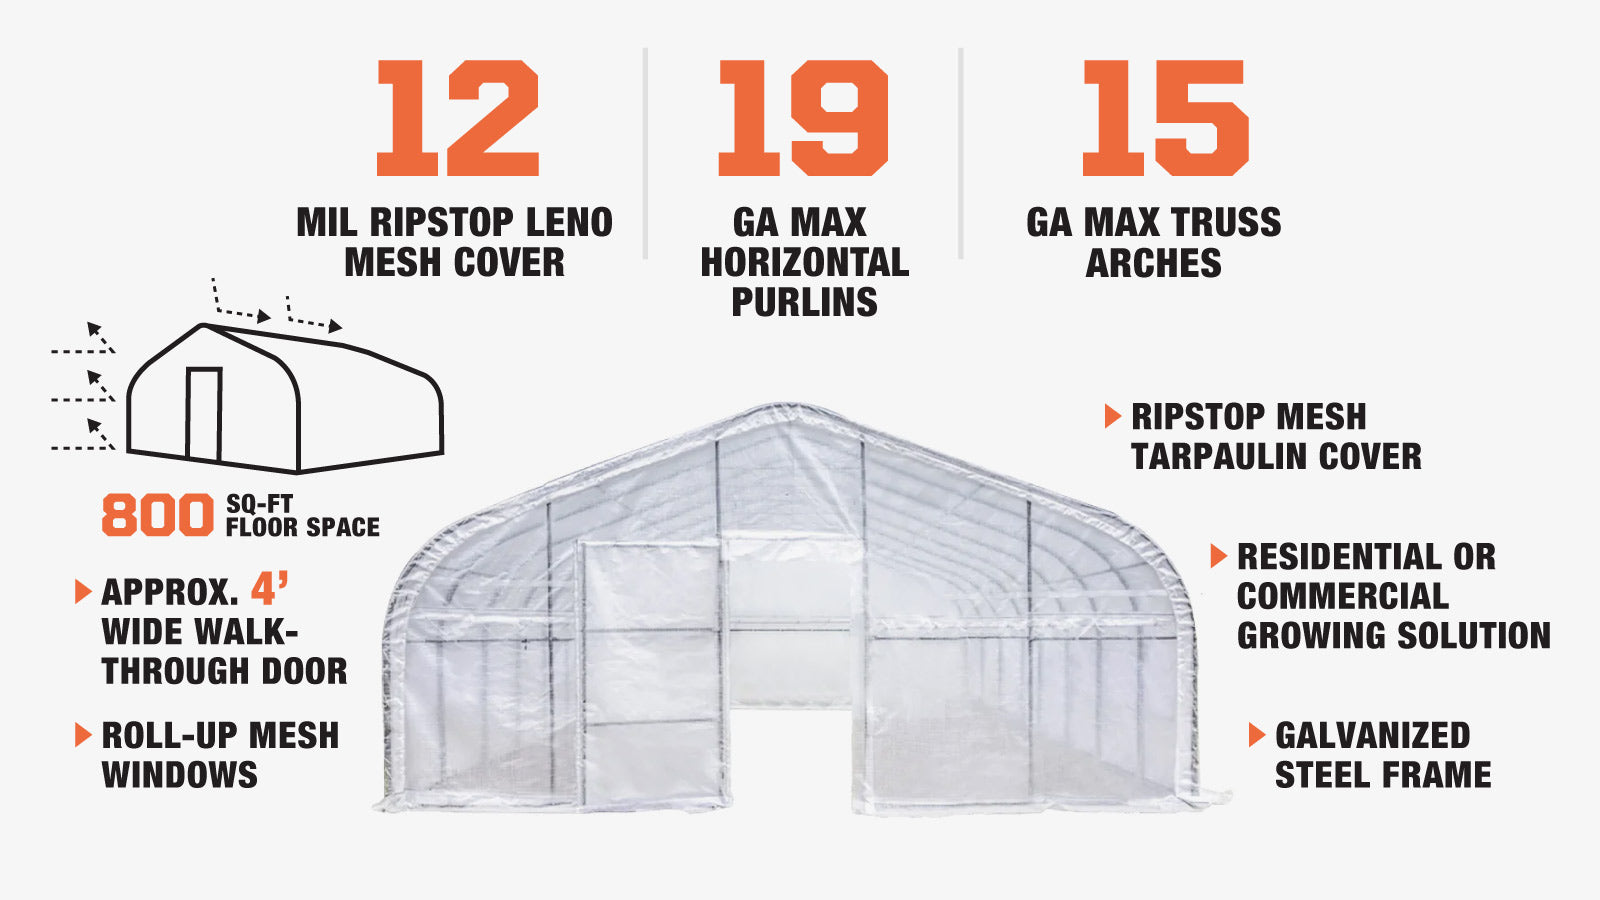 TMG Industrial 20' x 40' Tunnel Greenhouse Grow Tent with 12 Mil Ripstop Leno Mesh Cover, Cold Frame, Roll-up Windows, Peak Ceiling Roof, TMG-GH2040-description-image